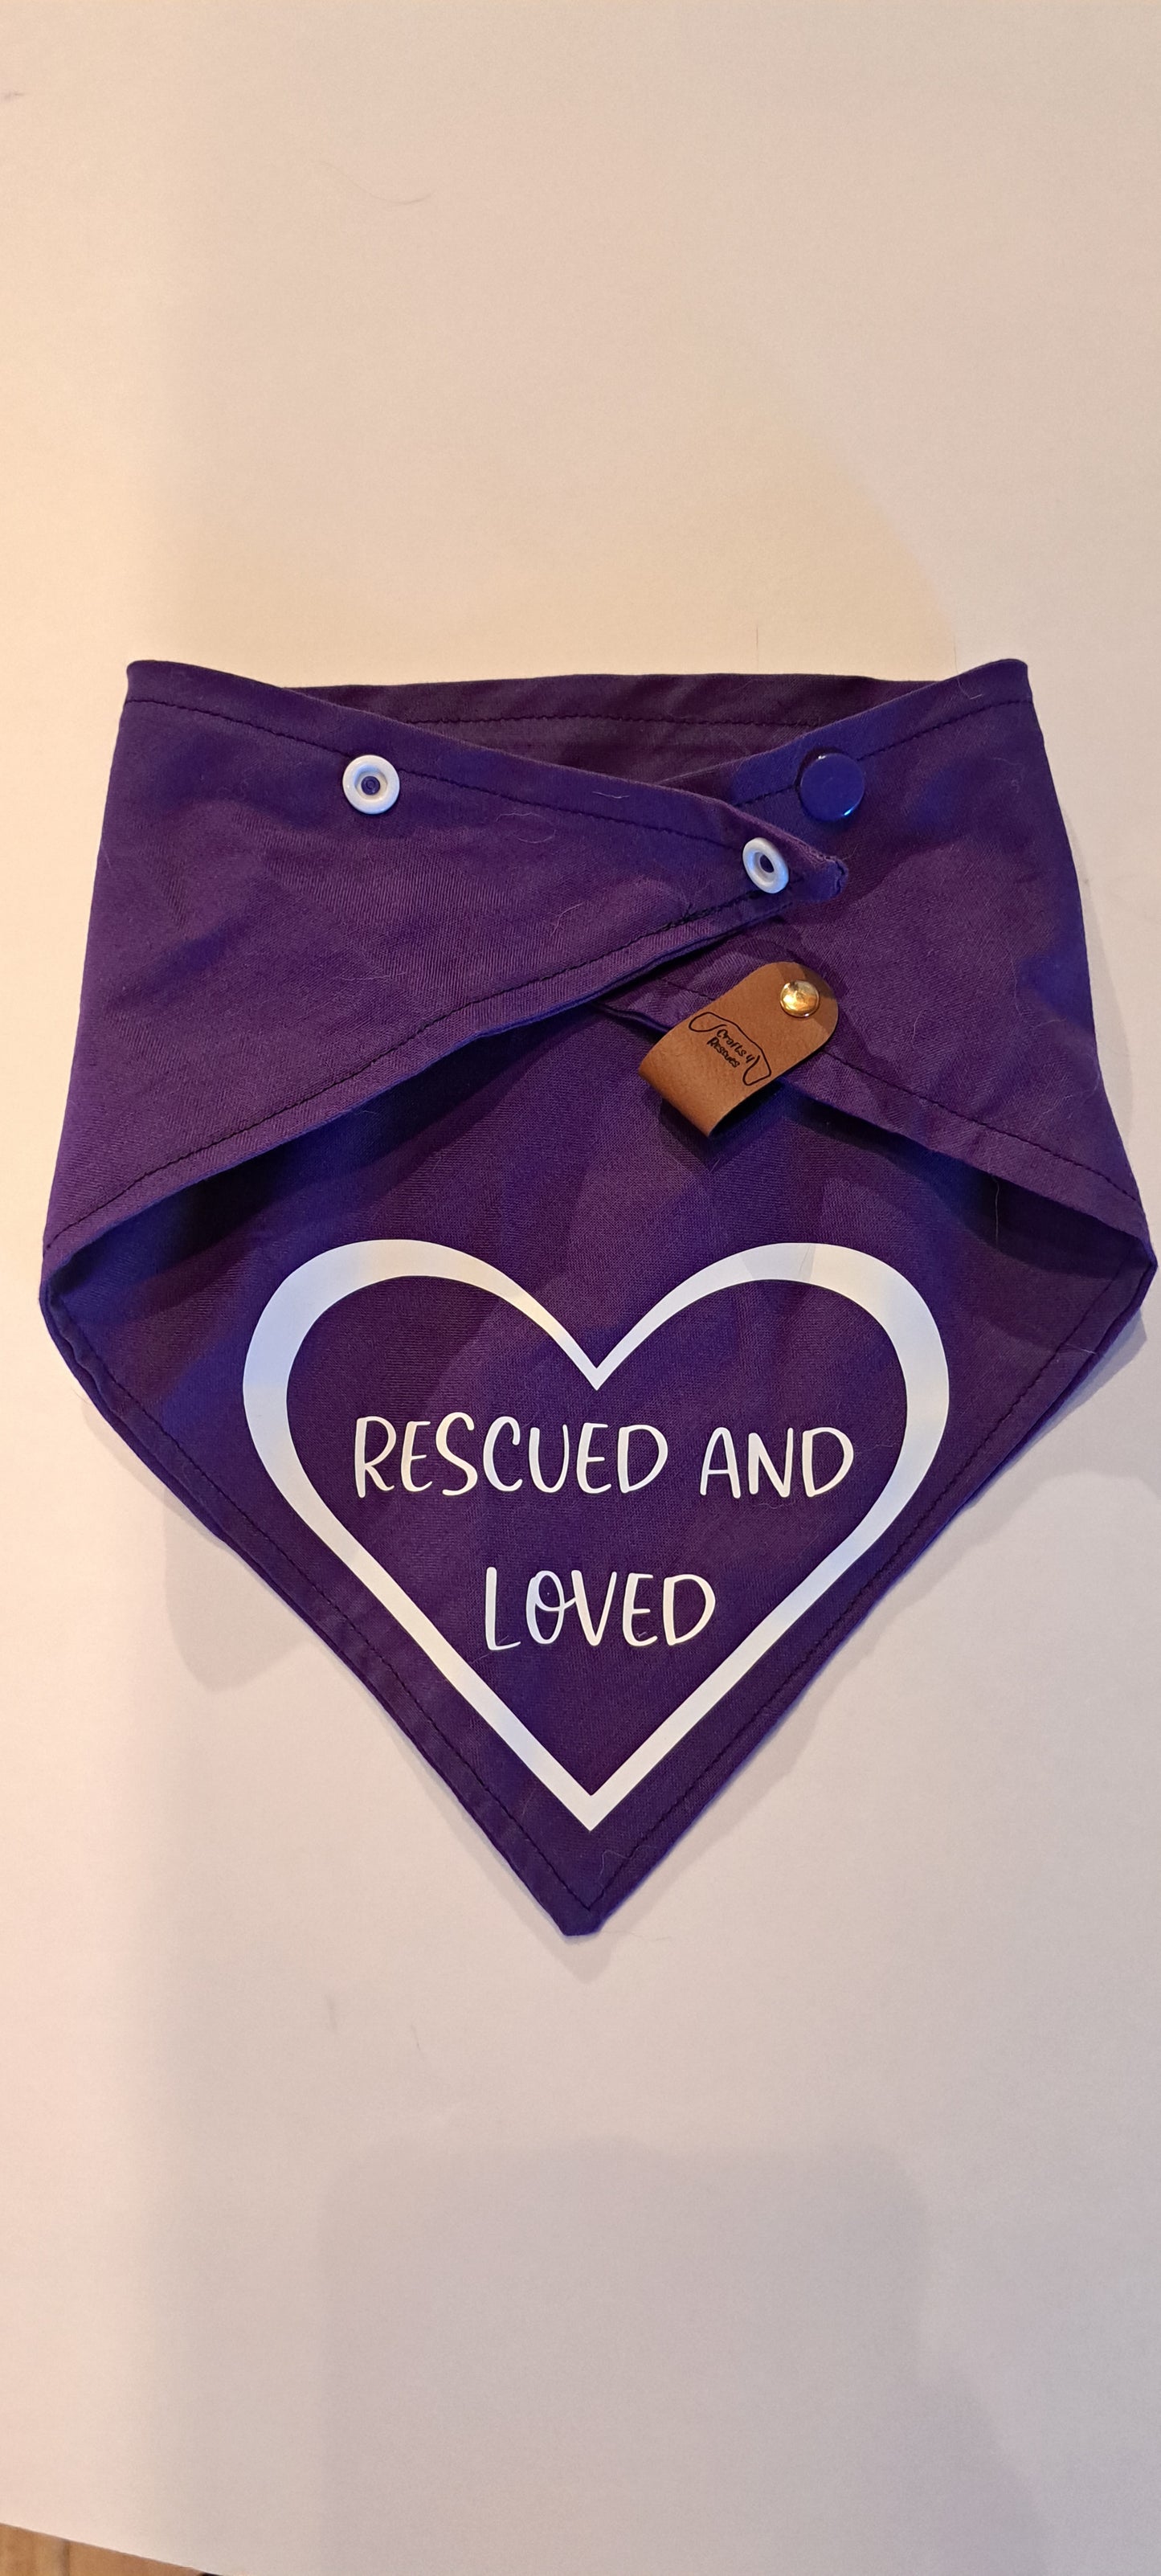 Rescued and Loved Purple and White Bandana